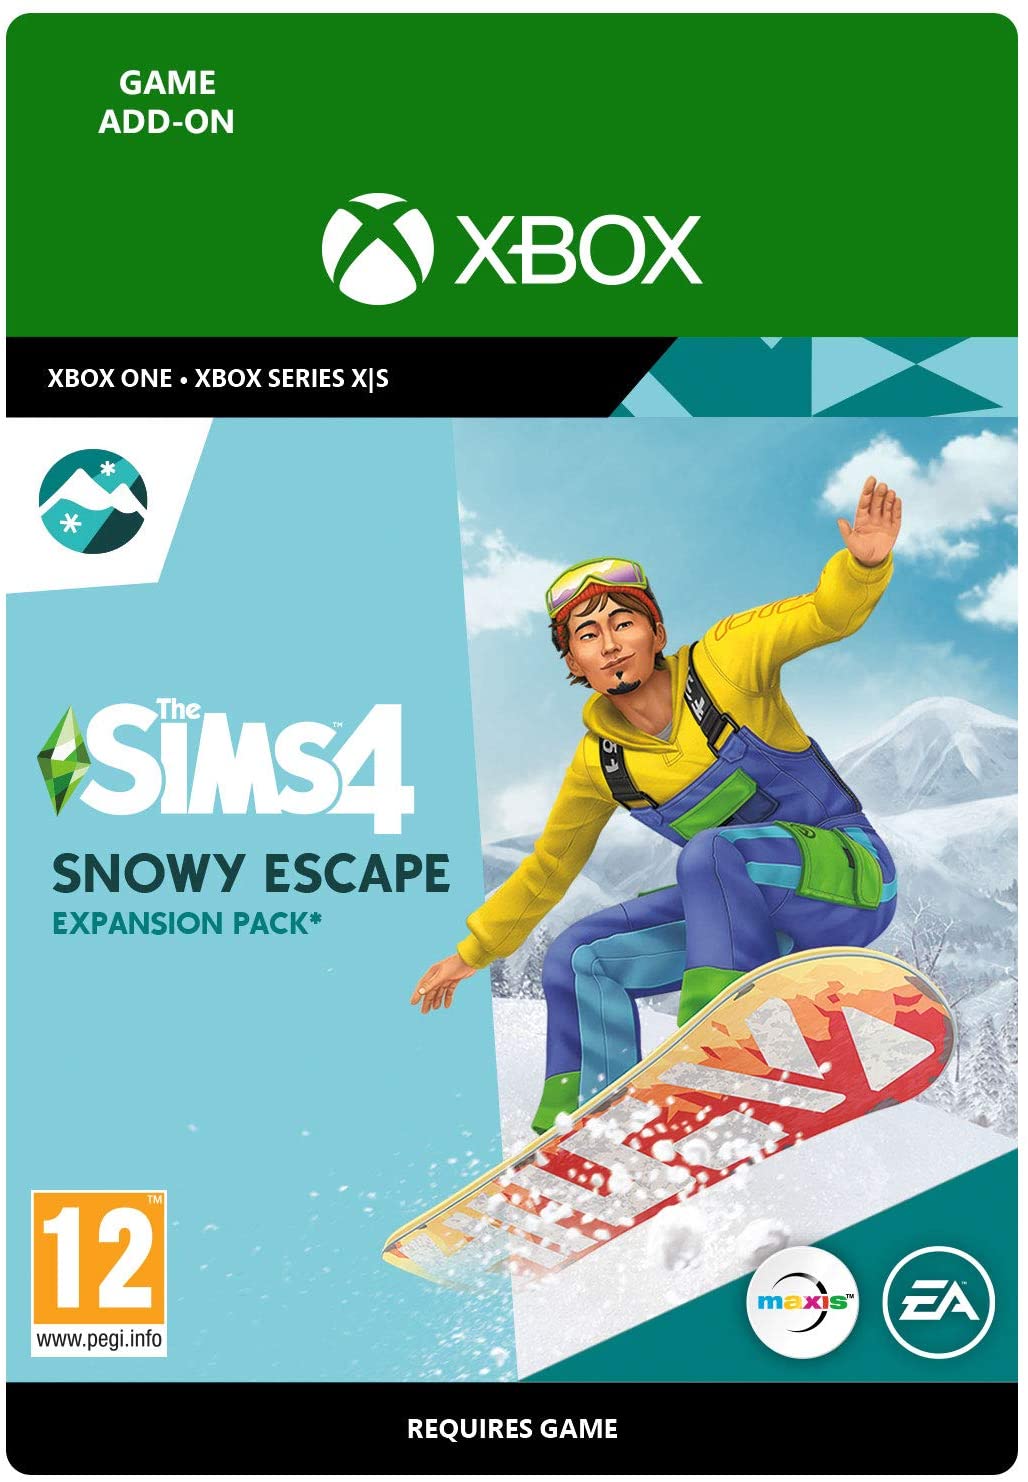 The Sims 4 Snowy Escape Digital Download Key (Xbox One): USA